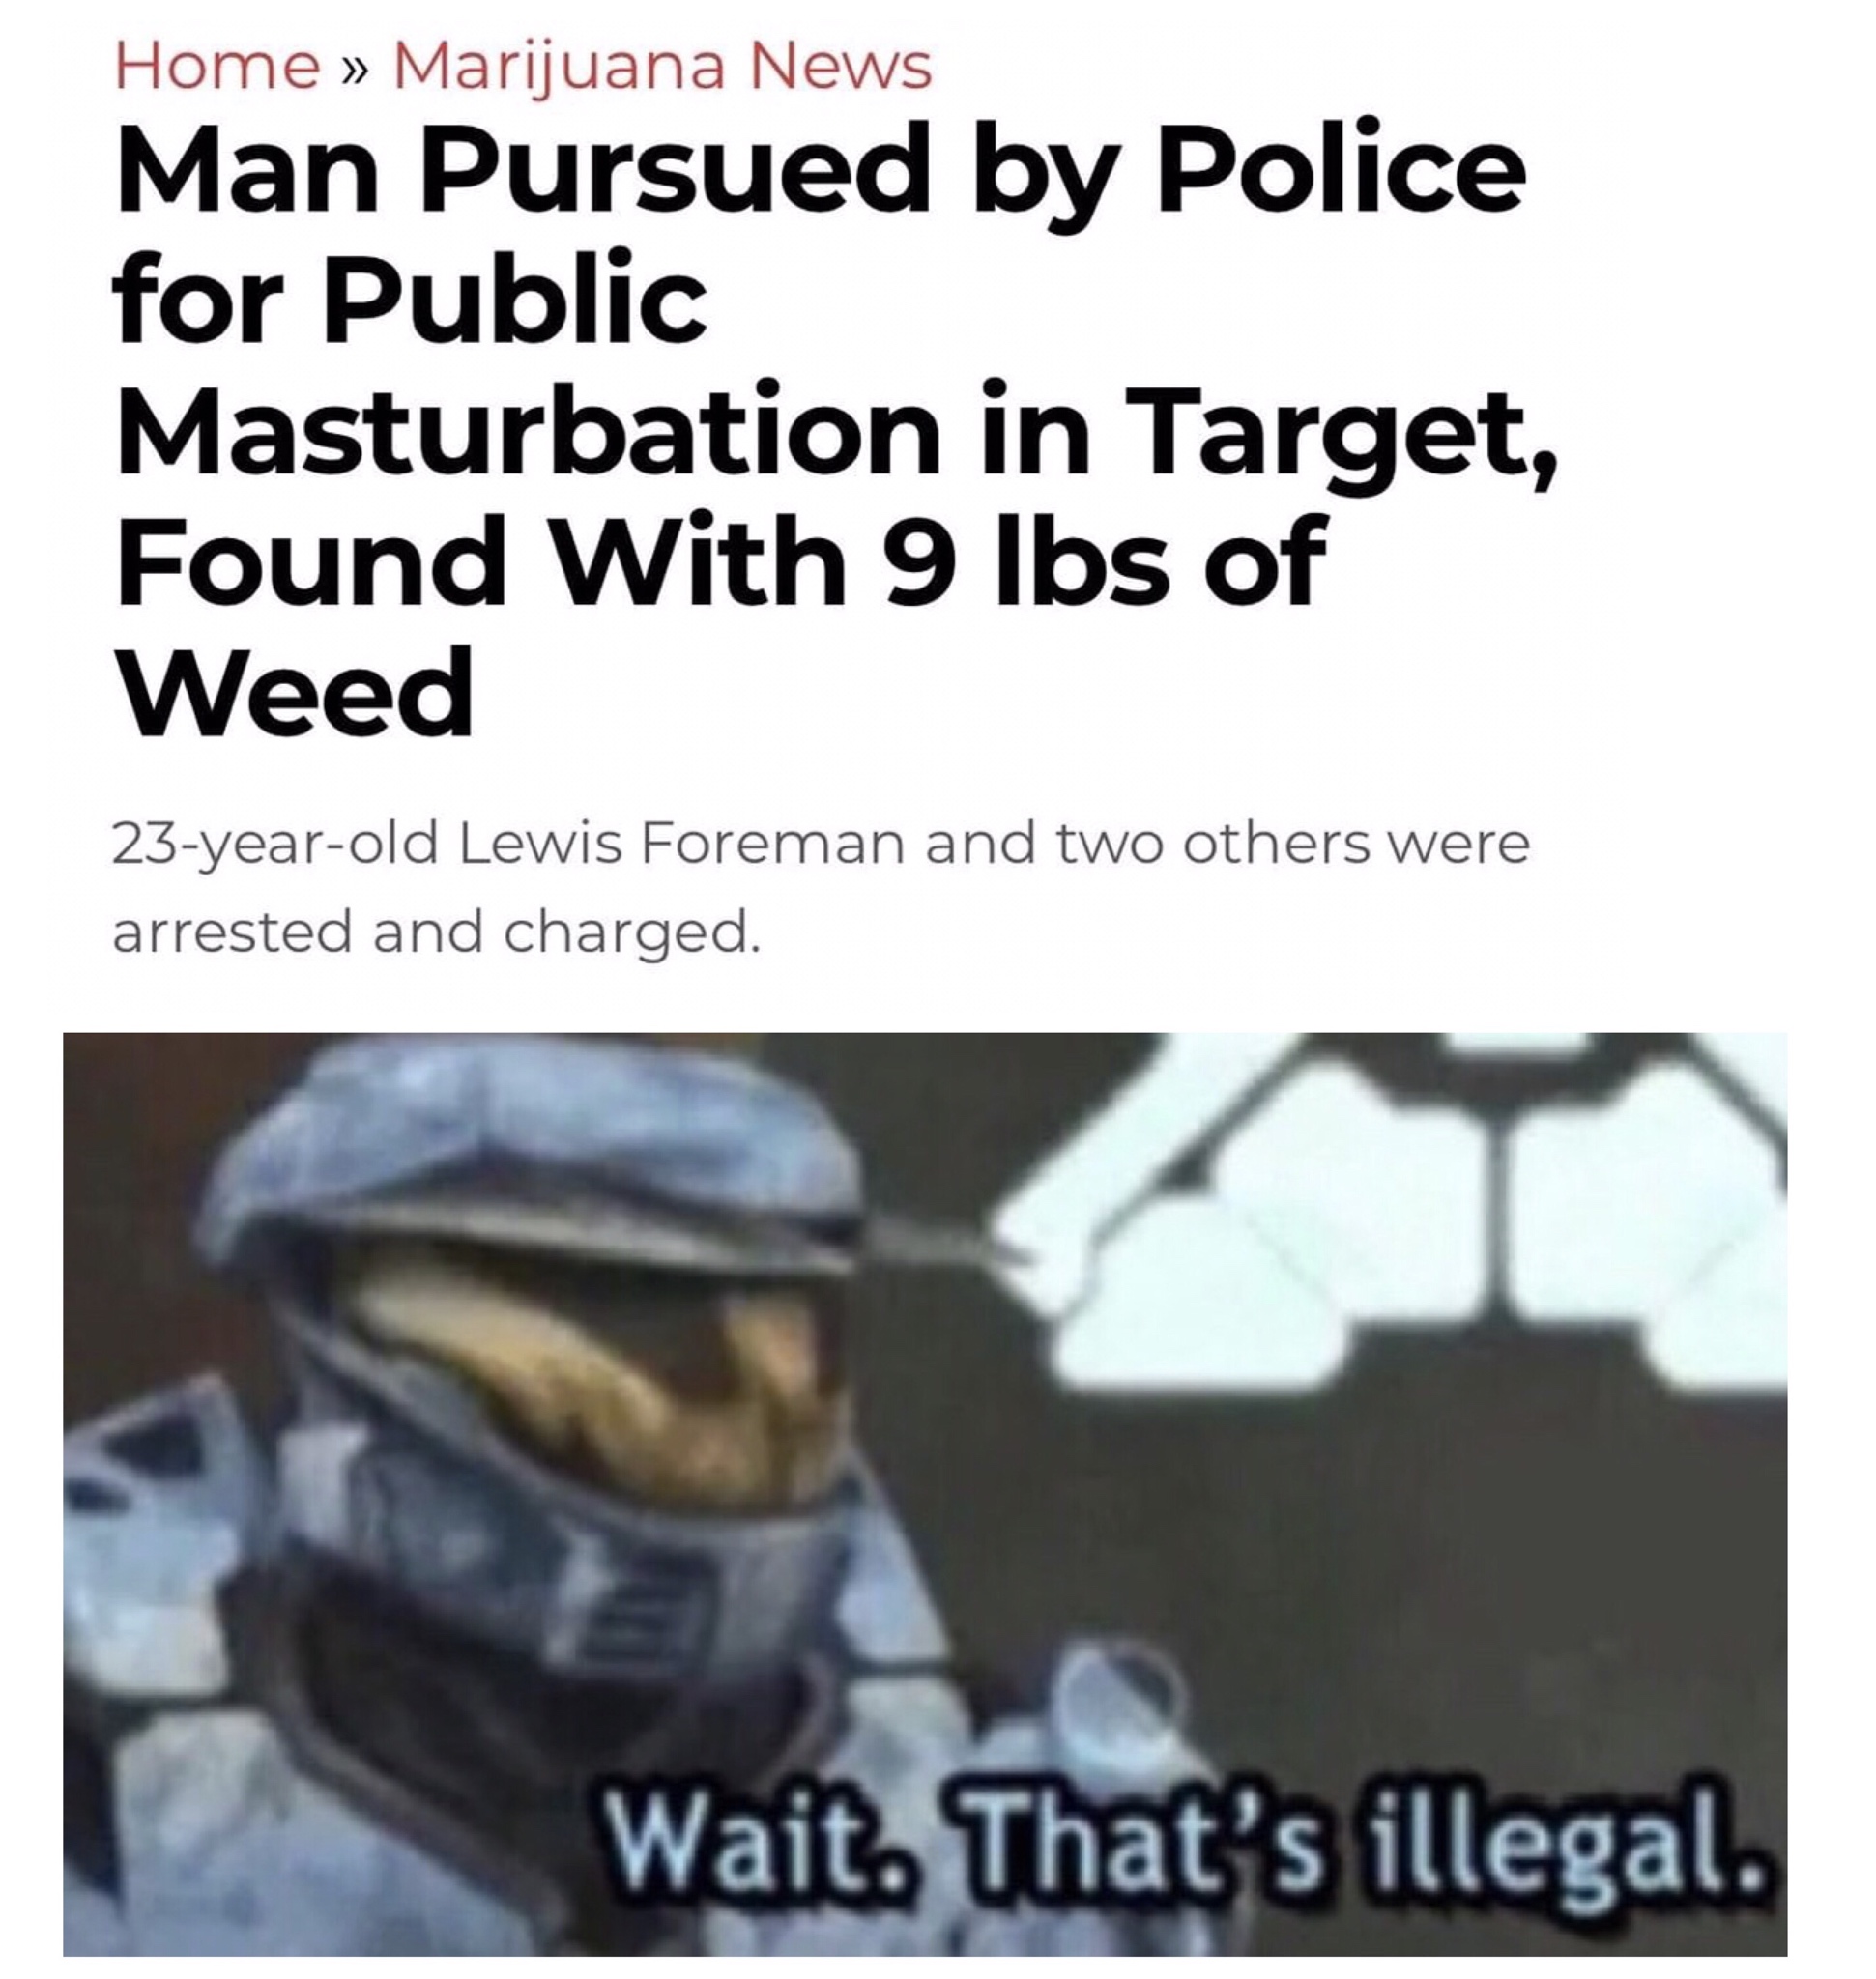 wait that's illegal fortnite meme - Home Marijuana News Man Pursued by Police for Public Masturbation in Target, Found With 9 lbs of Weed 23yearold Lewis Foreman and two others were arrested and charged. Wait. That's illegal.